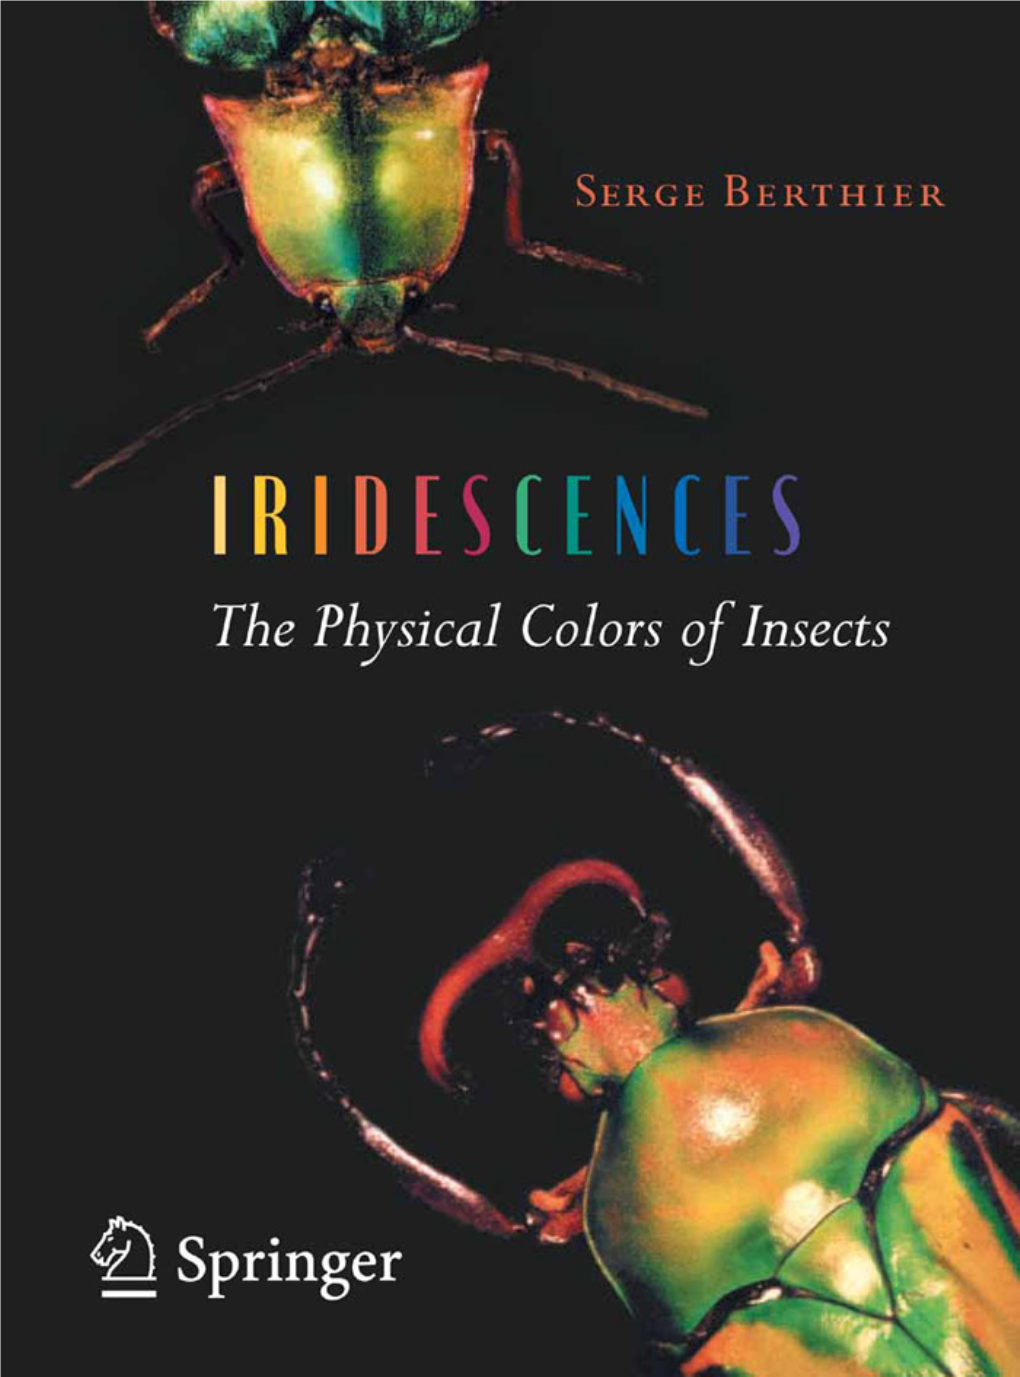 Iridescences: the Physical Colors of Insects